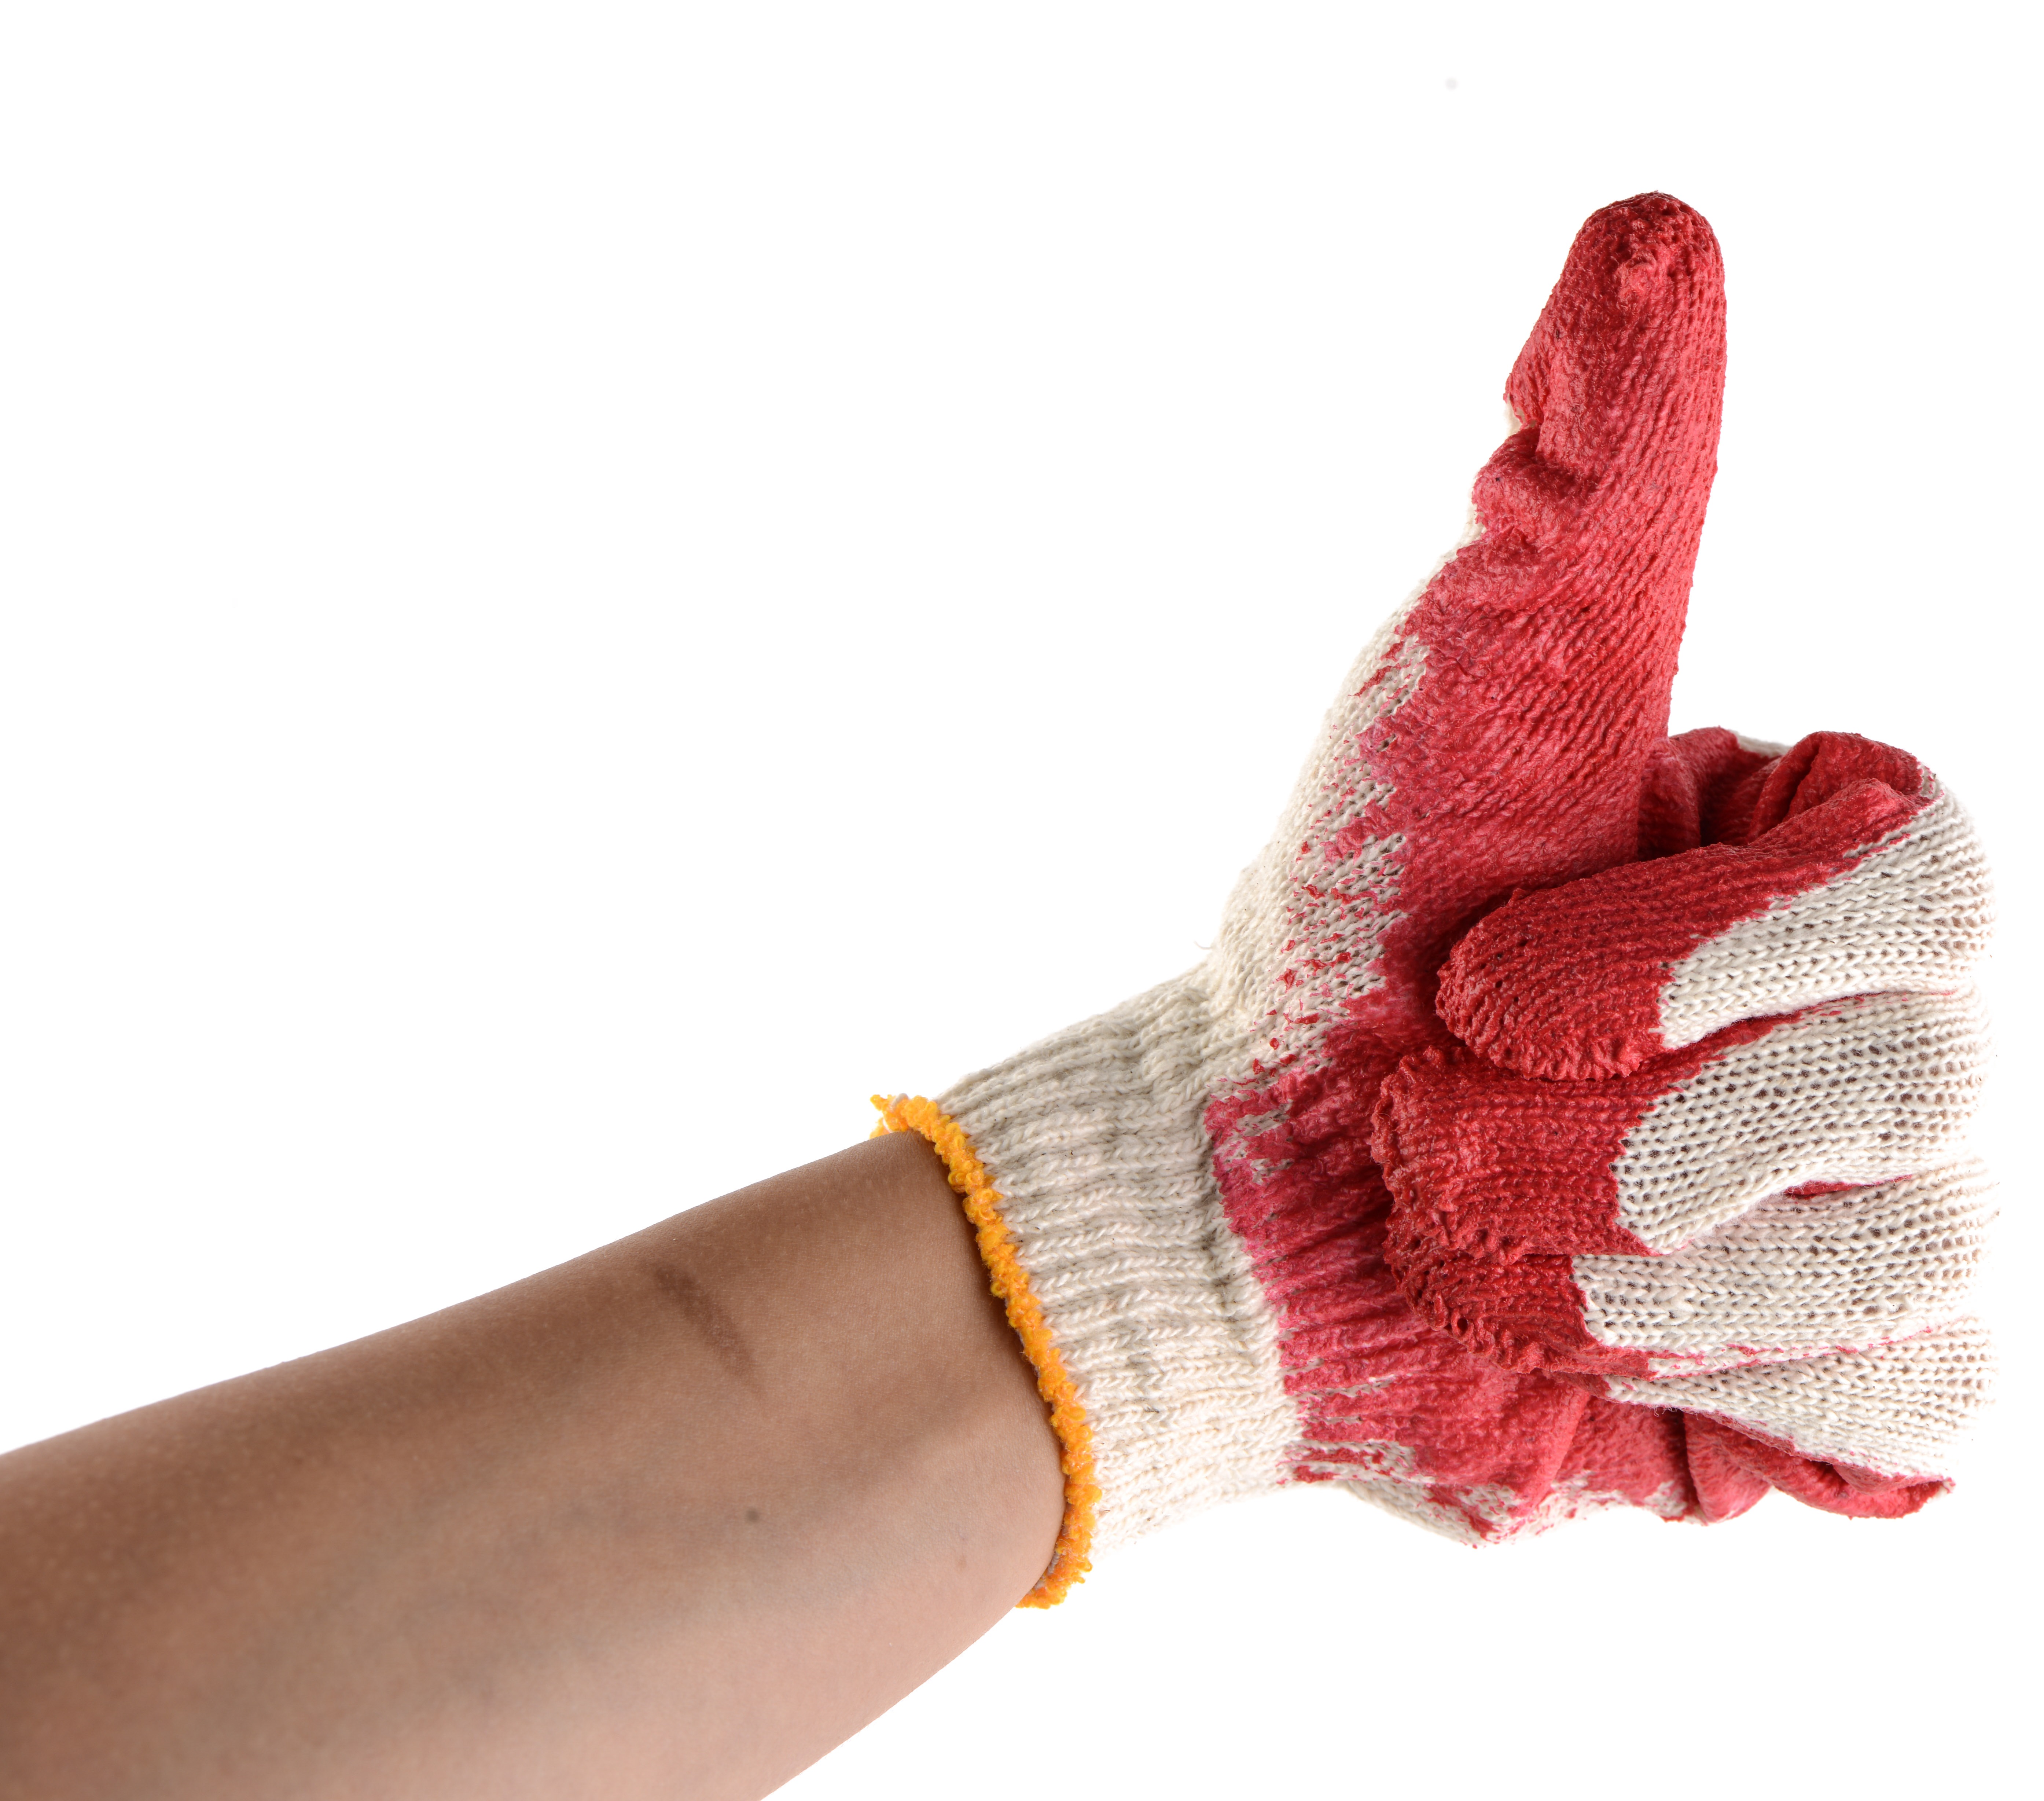 STIX-ON SAFETY Non-Slip 300 Pairs Work Construction Gloves Red Latex Cotton Working Nitrile Rubber Palm Coated Garden Gloves - 2